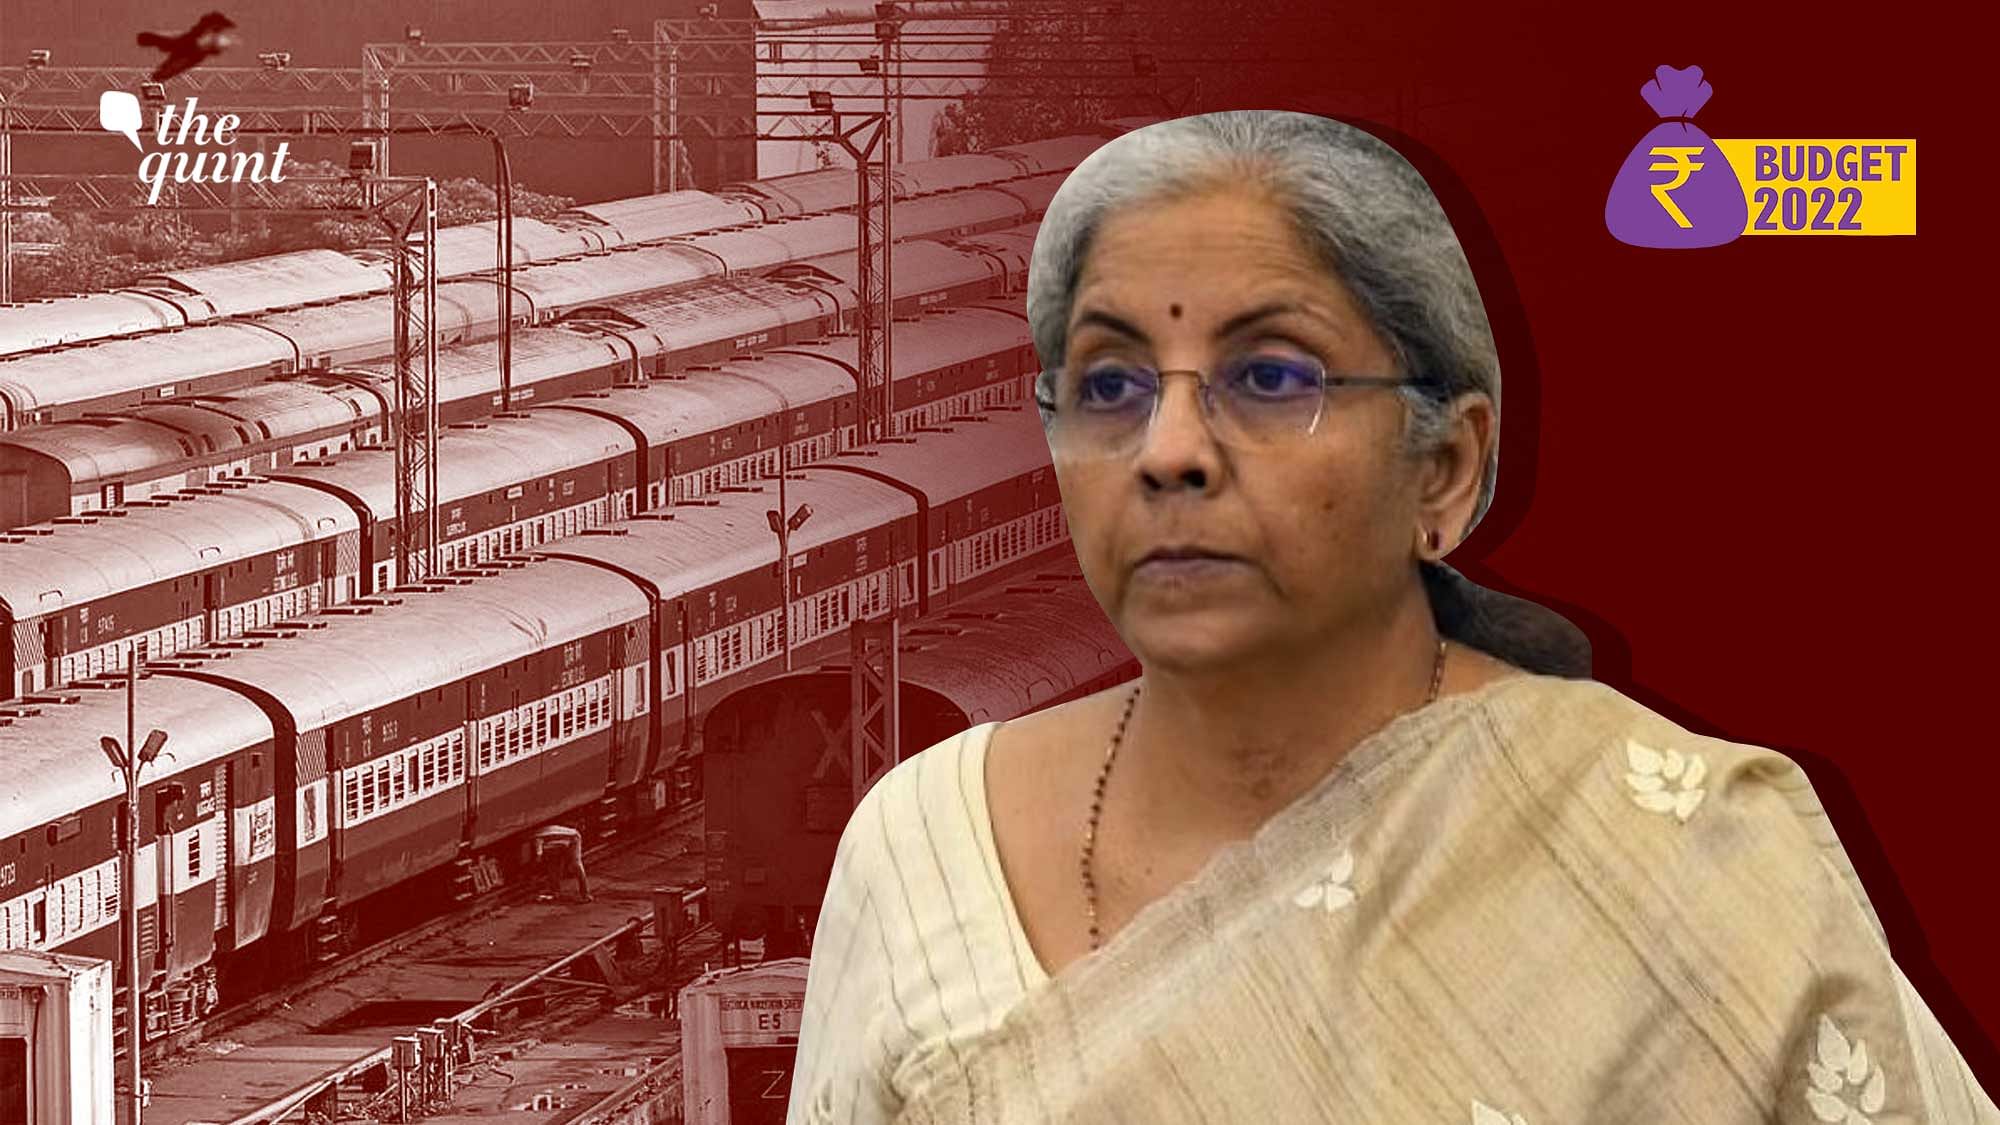 <div class="paragraphs"><p>While presenting the Union Budget 2022 on Tuesday, 1 February, Finance Minister Nirmala Sitharaman announced that 400 new generation Vande Bharat trains will be brought in during the next three years.</p></div>